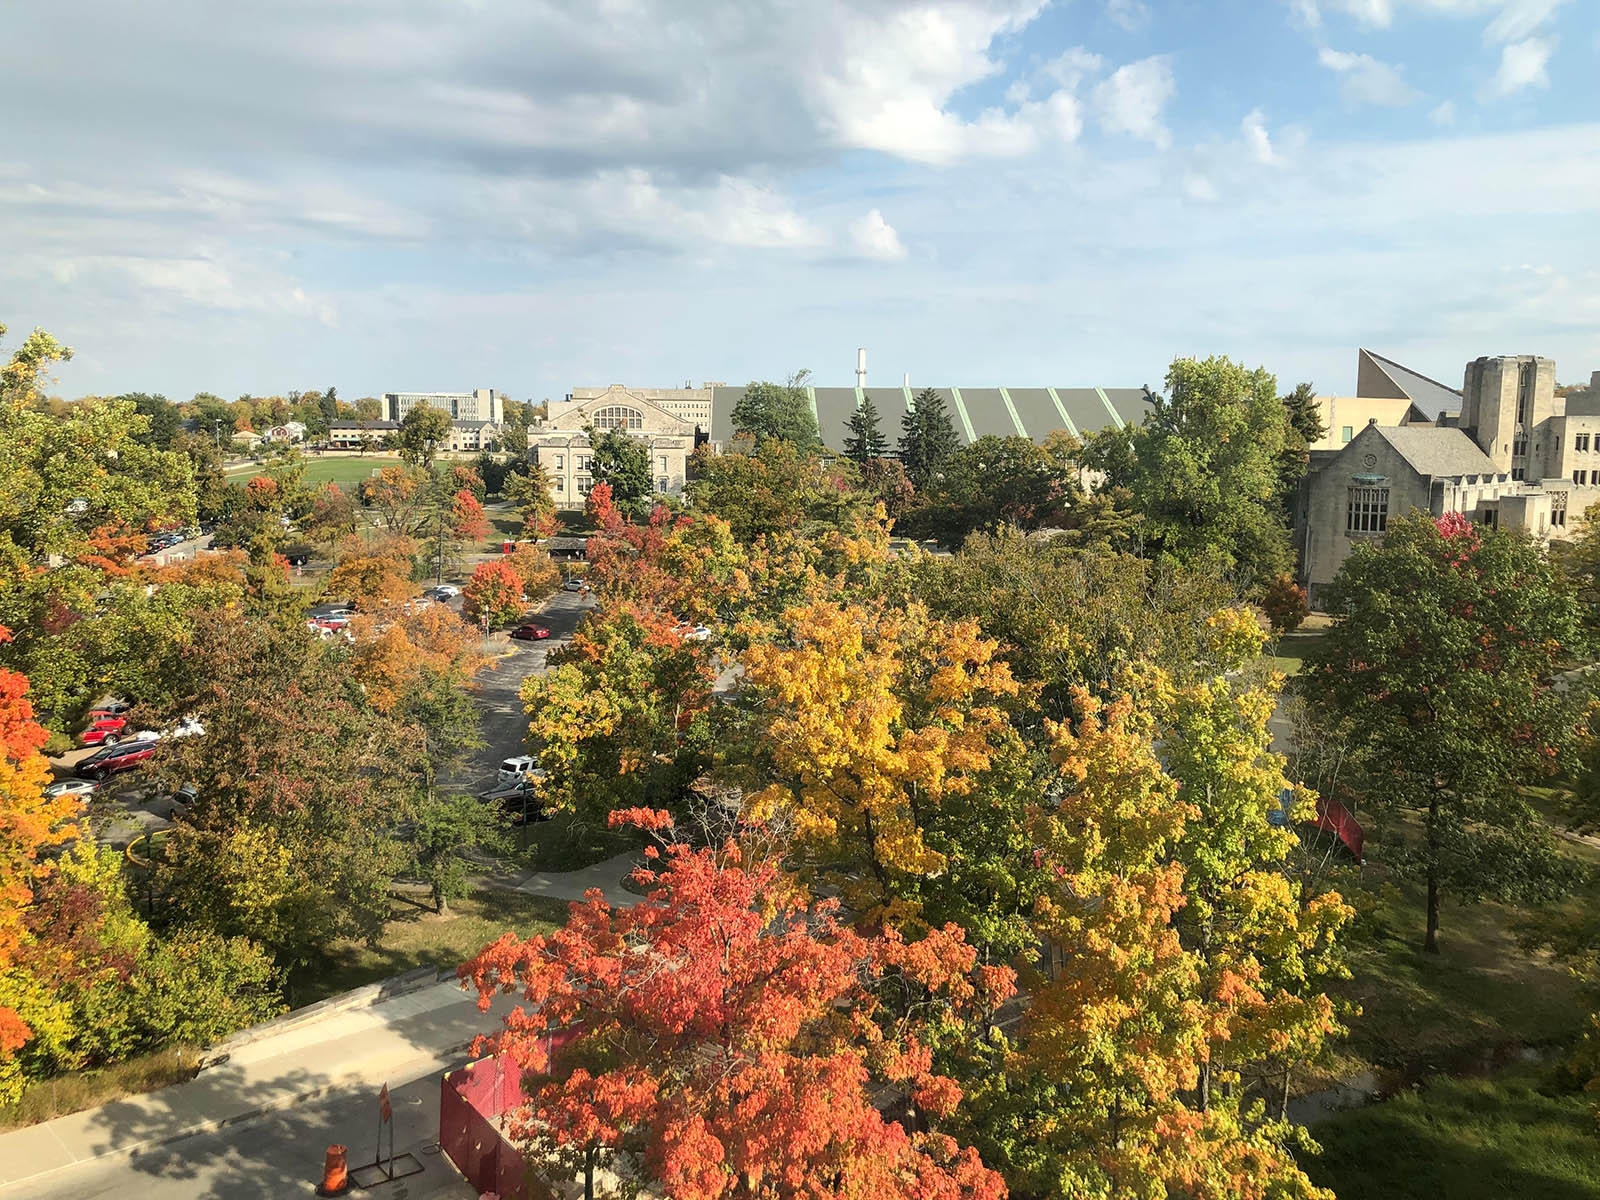 stock-photo-indiana-university-bloomington-in-the-fall-view-from-ballantine-hall-of-multi-colored-leaves-over-2259141521